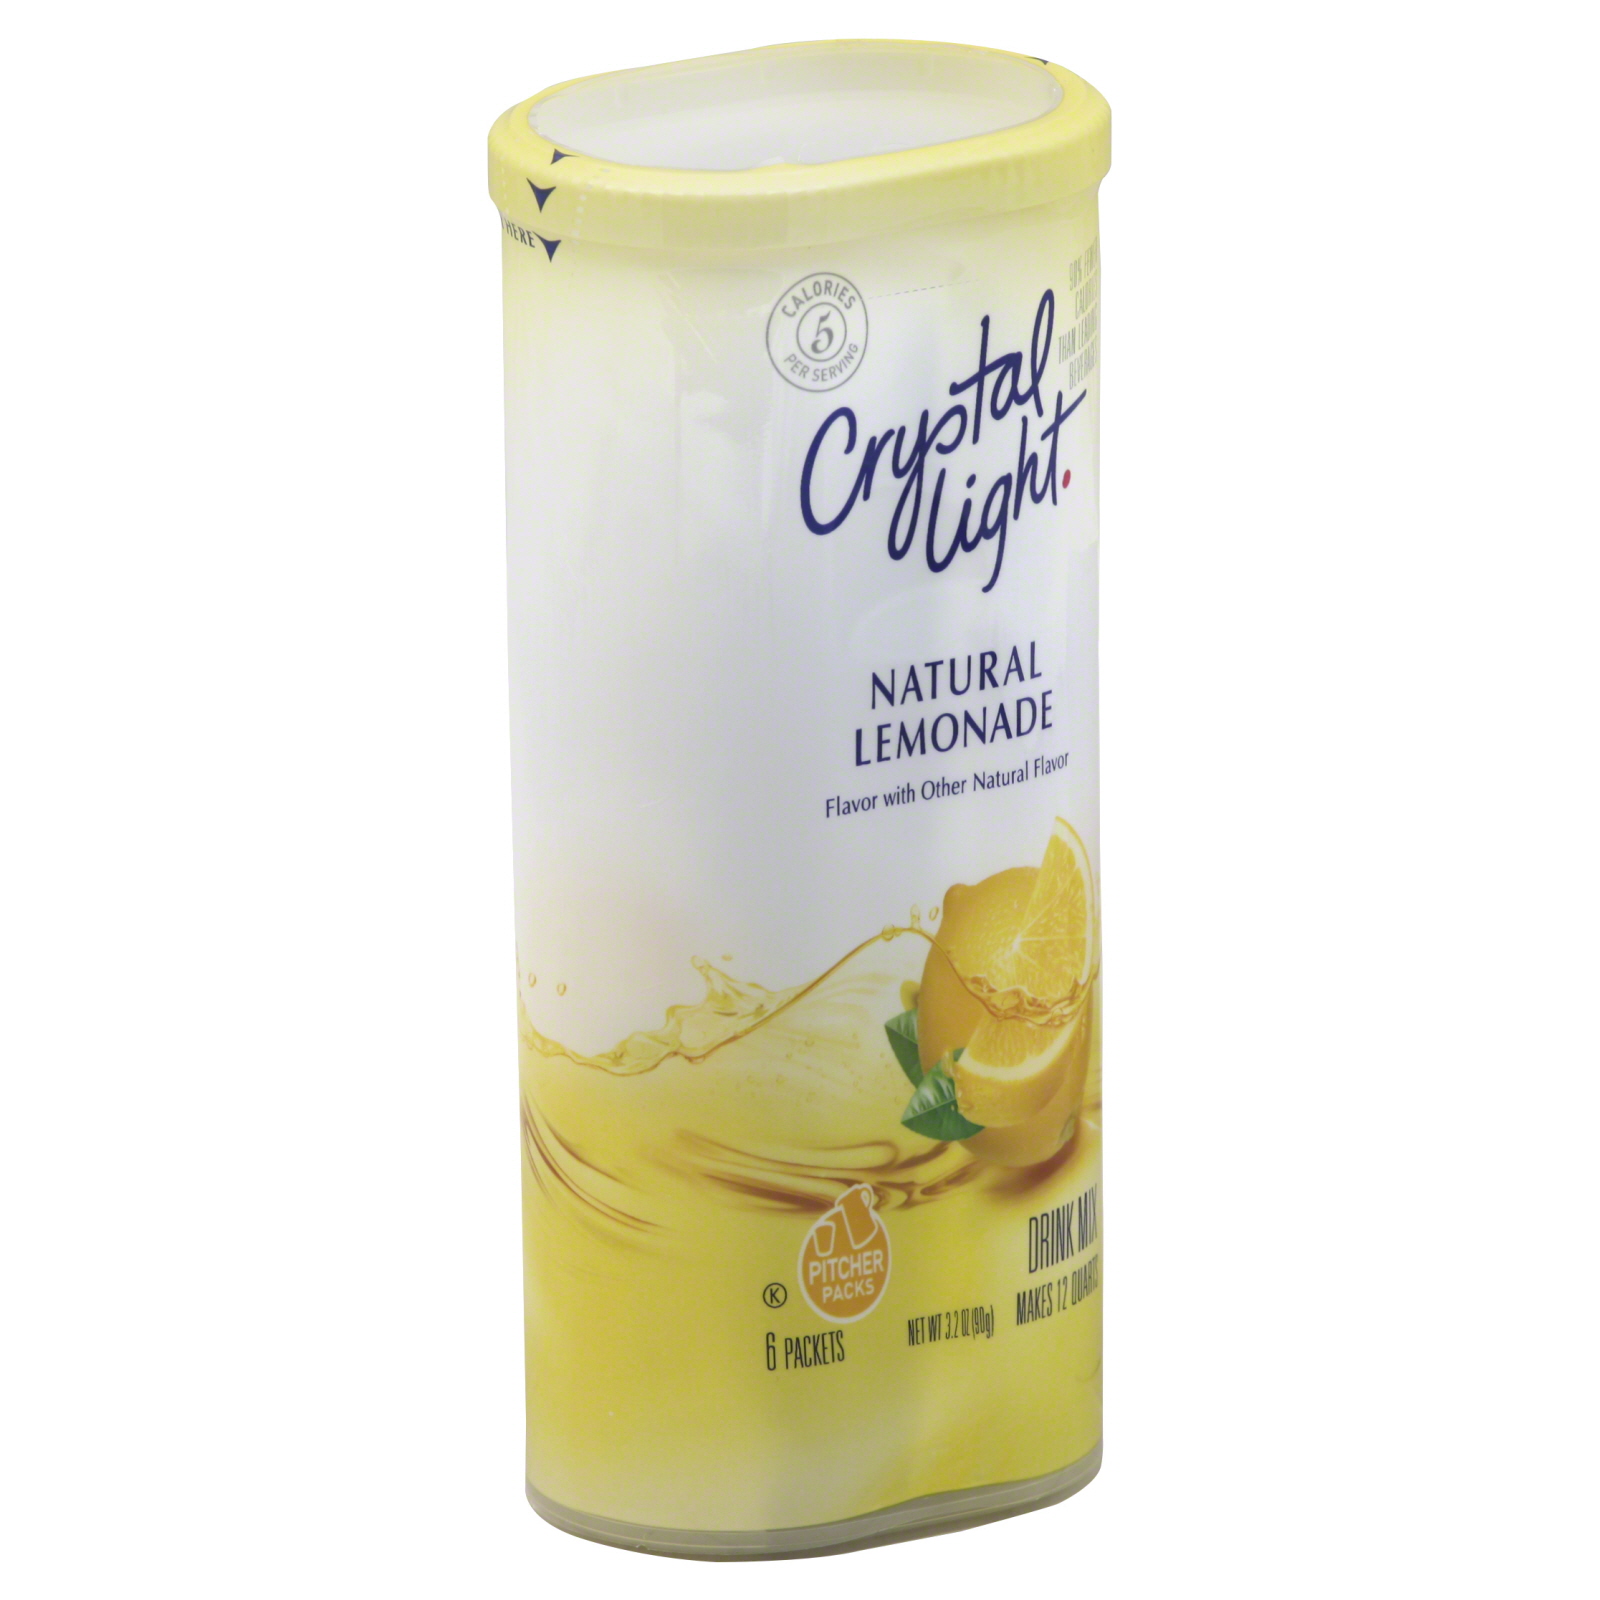 Country Time Flavor Drink Mix, Lemonade, 19 oz (1 lb 3 oz) 538 g   Food & Grocery   Beverages   Powdered Drink Mixes